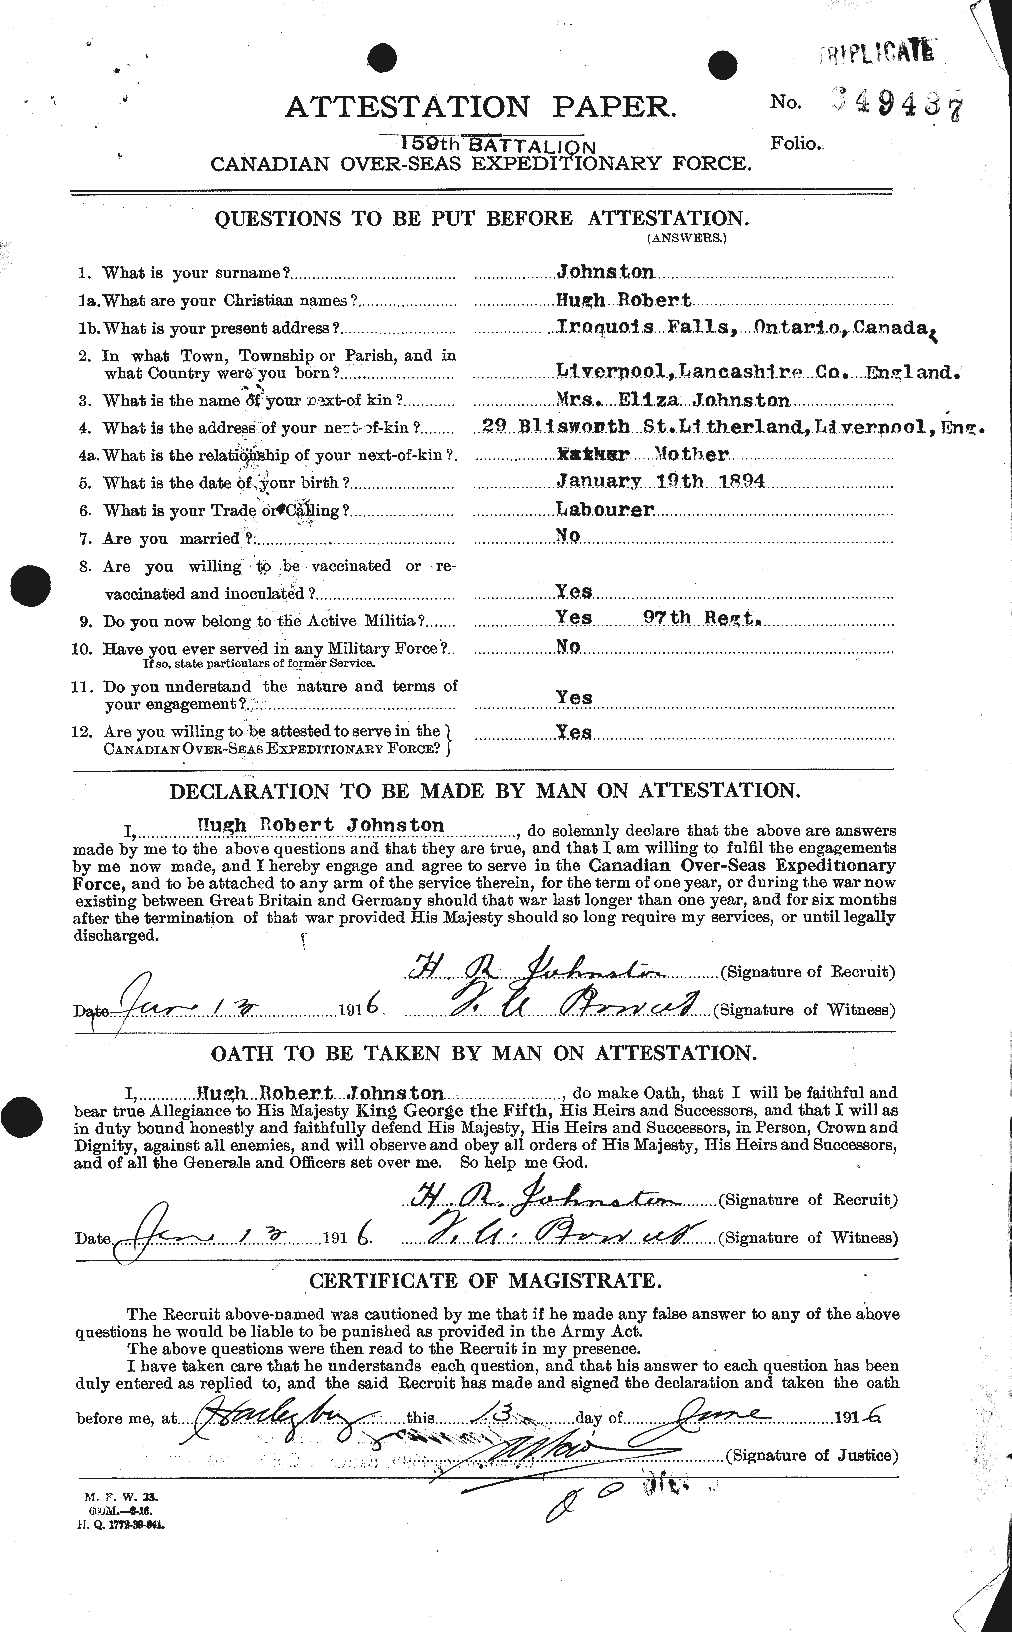 Personnel Records of the First World War - CEF 422668a